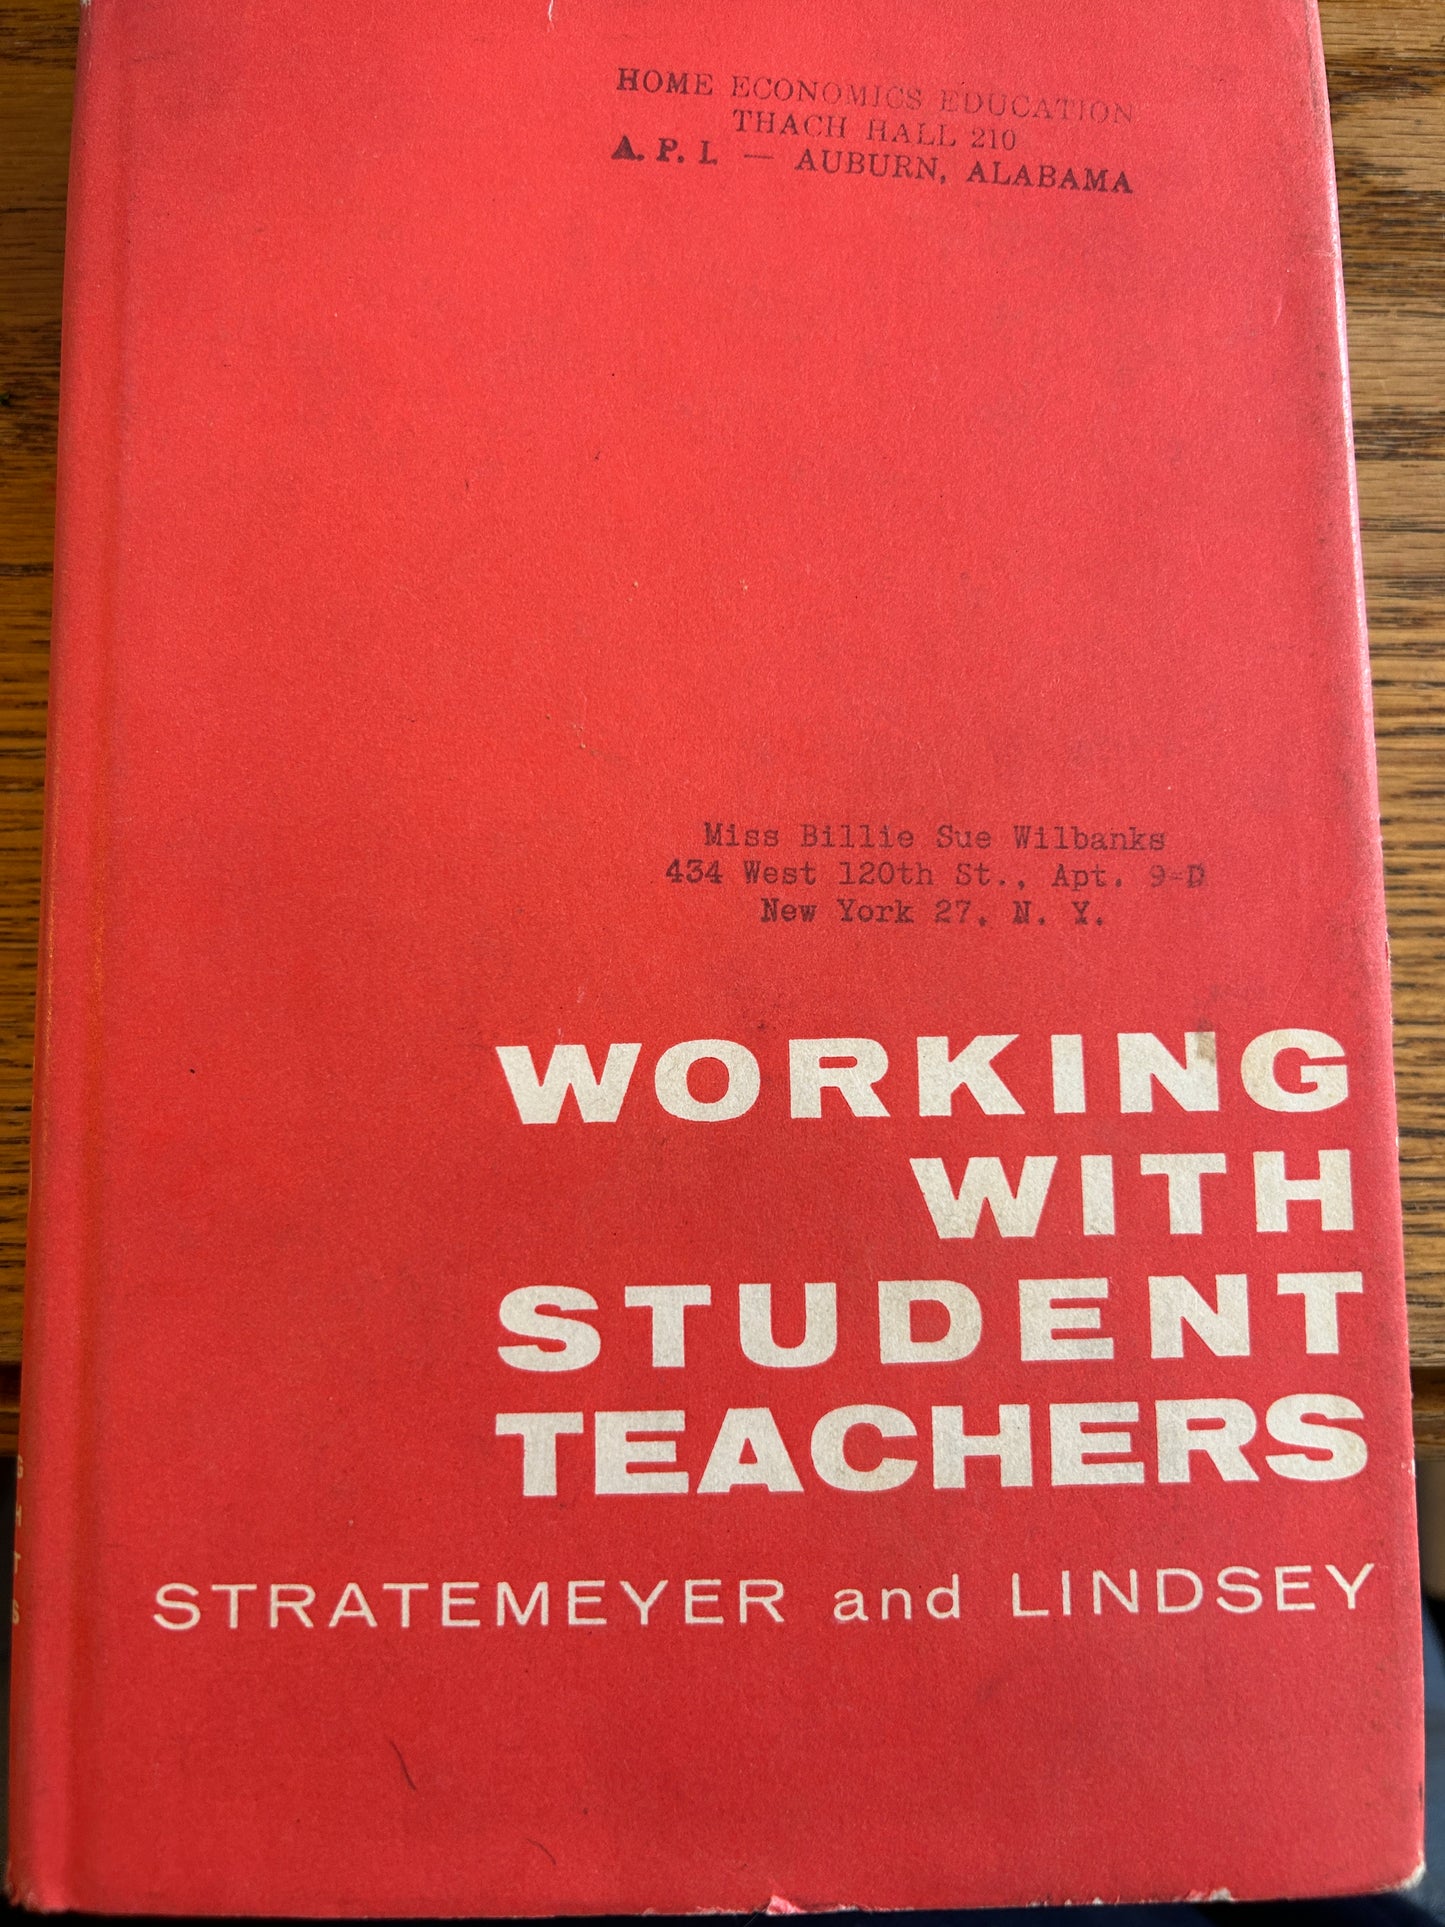 Working with student teachers Hardcover by Stratemeyer and Lindsay - January 1, 1958